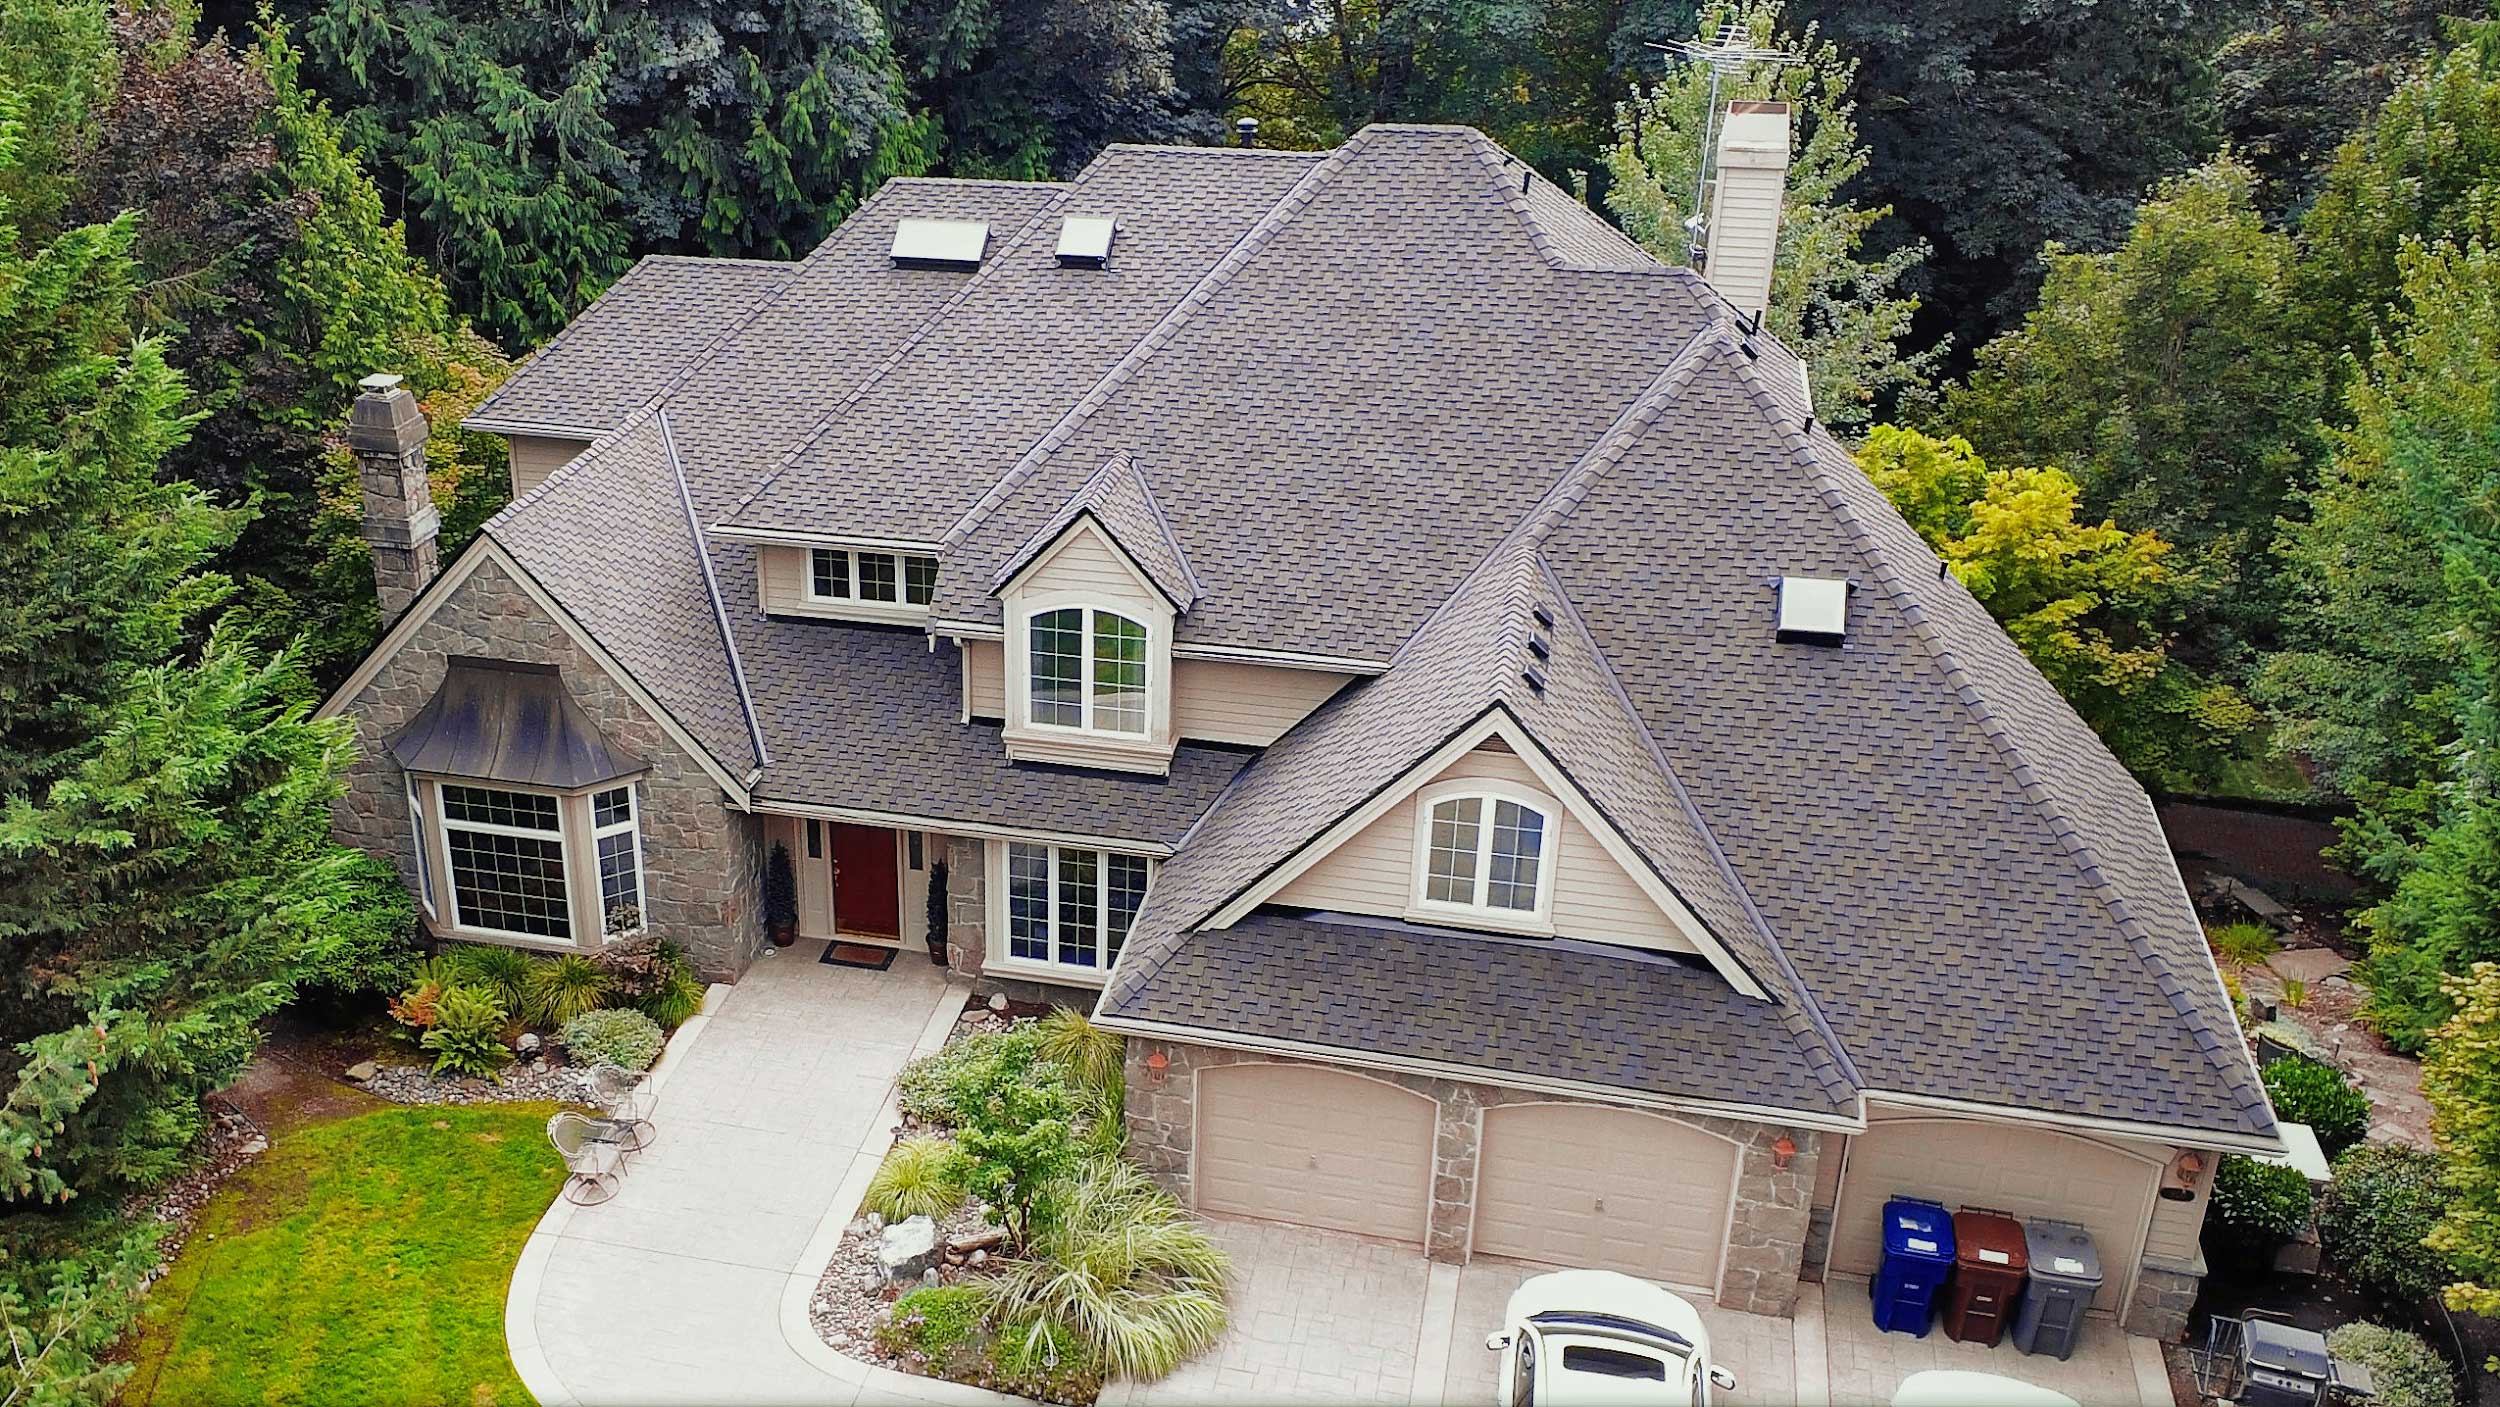 Three Tree Roofing’s composite roof portfolio projects, the 'Sammamish Cedar Conversion'